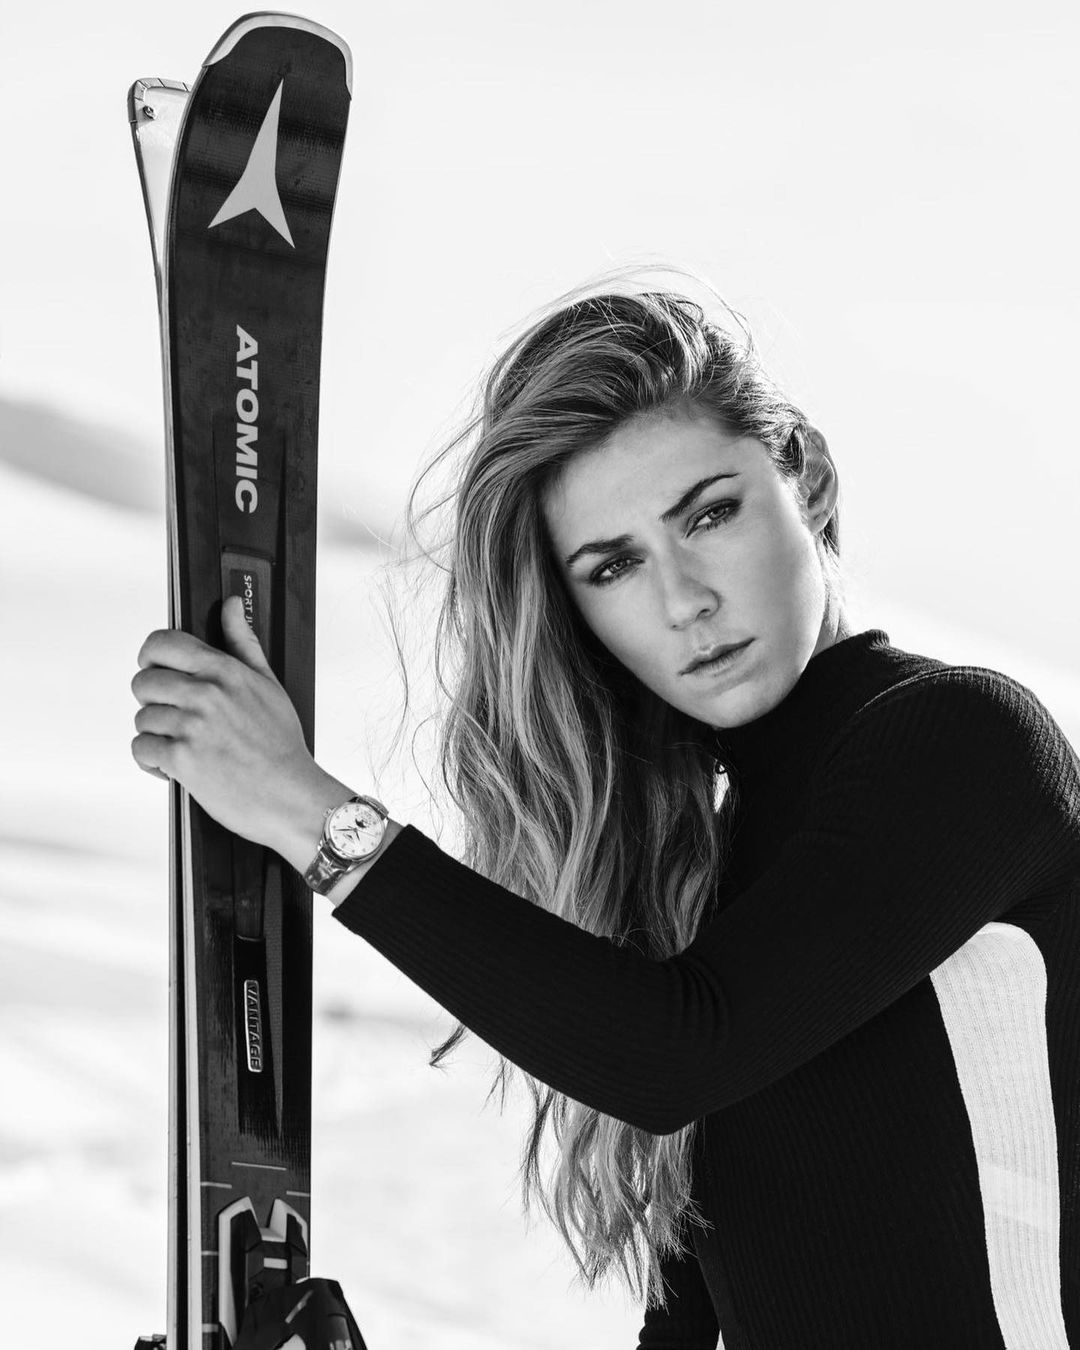 Mikaela Shiffrin In Bathing Suit Catches Massive Waves